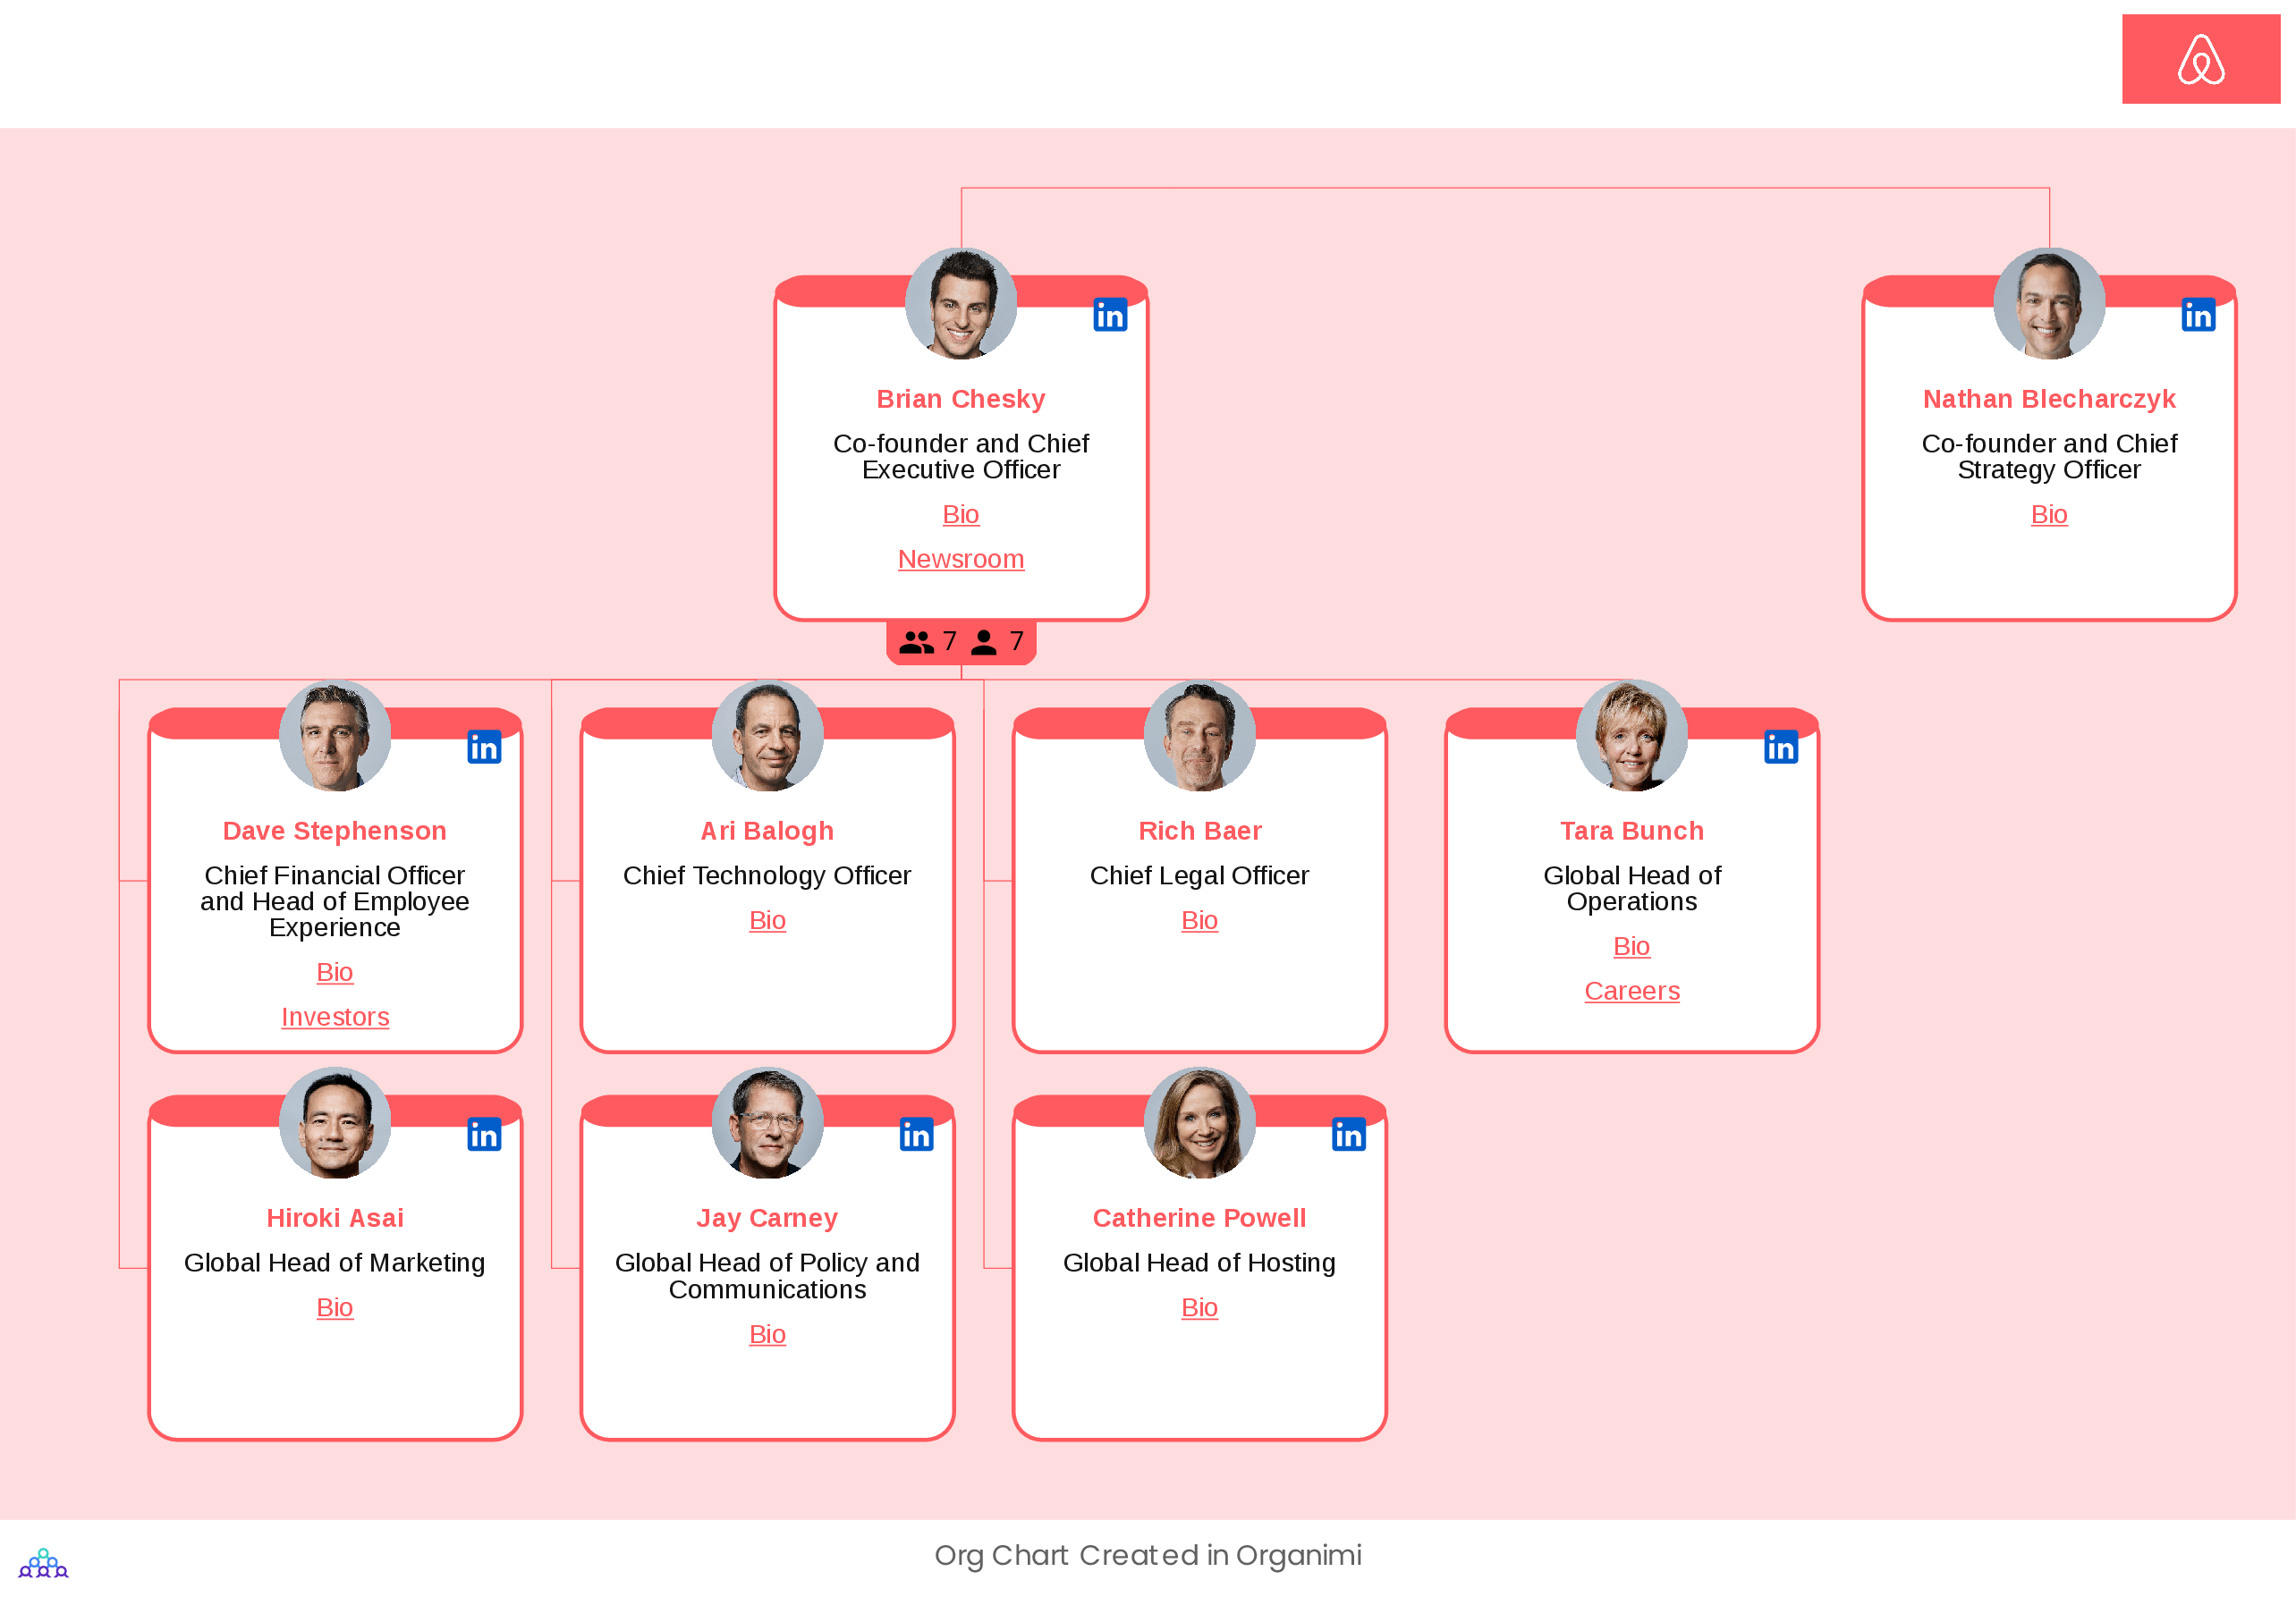 Airbnb's Organizational Structure Chart